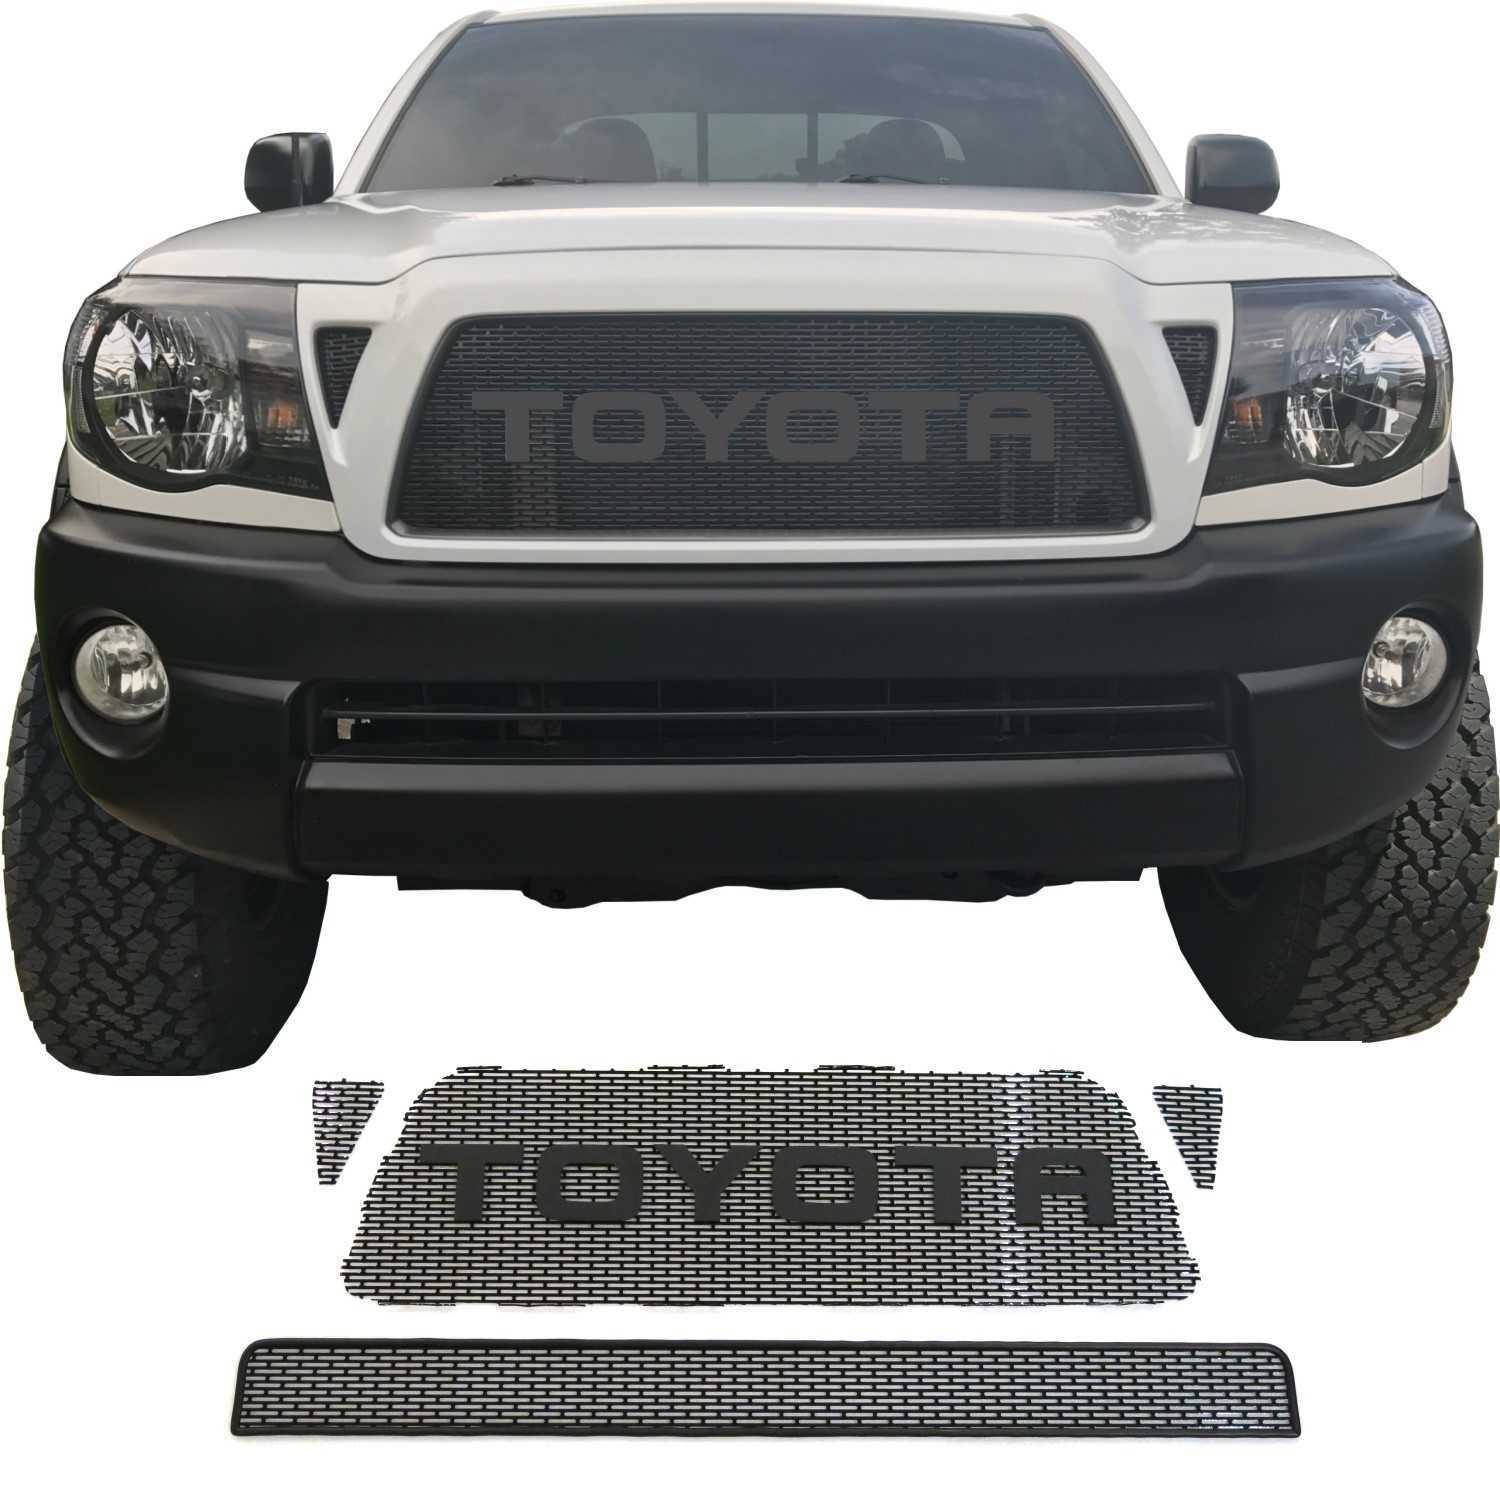 2005 - 2011 Toyota Tacoma Mesh Grill Builder #2